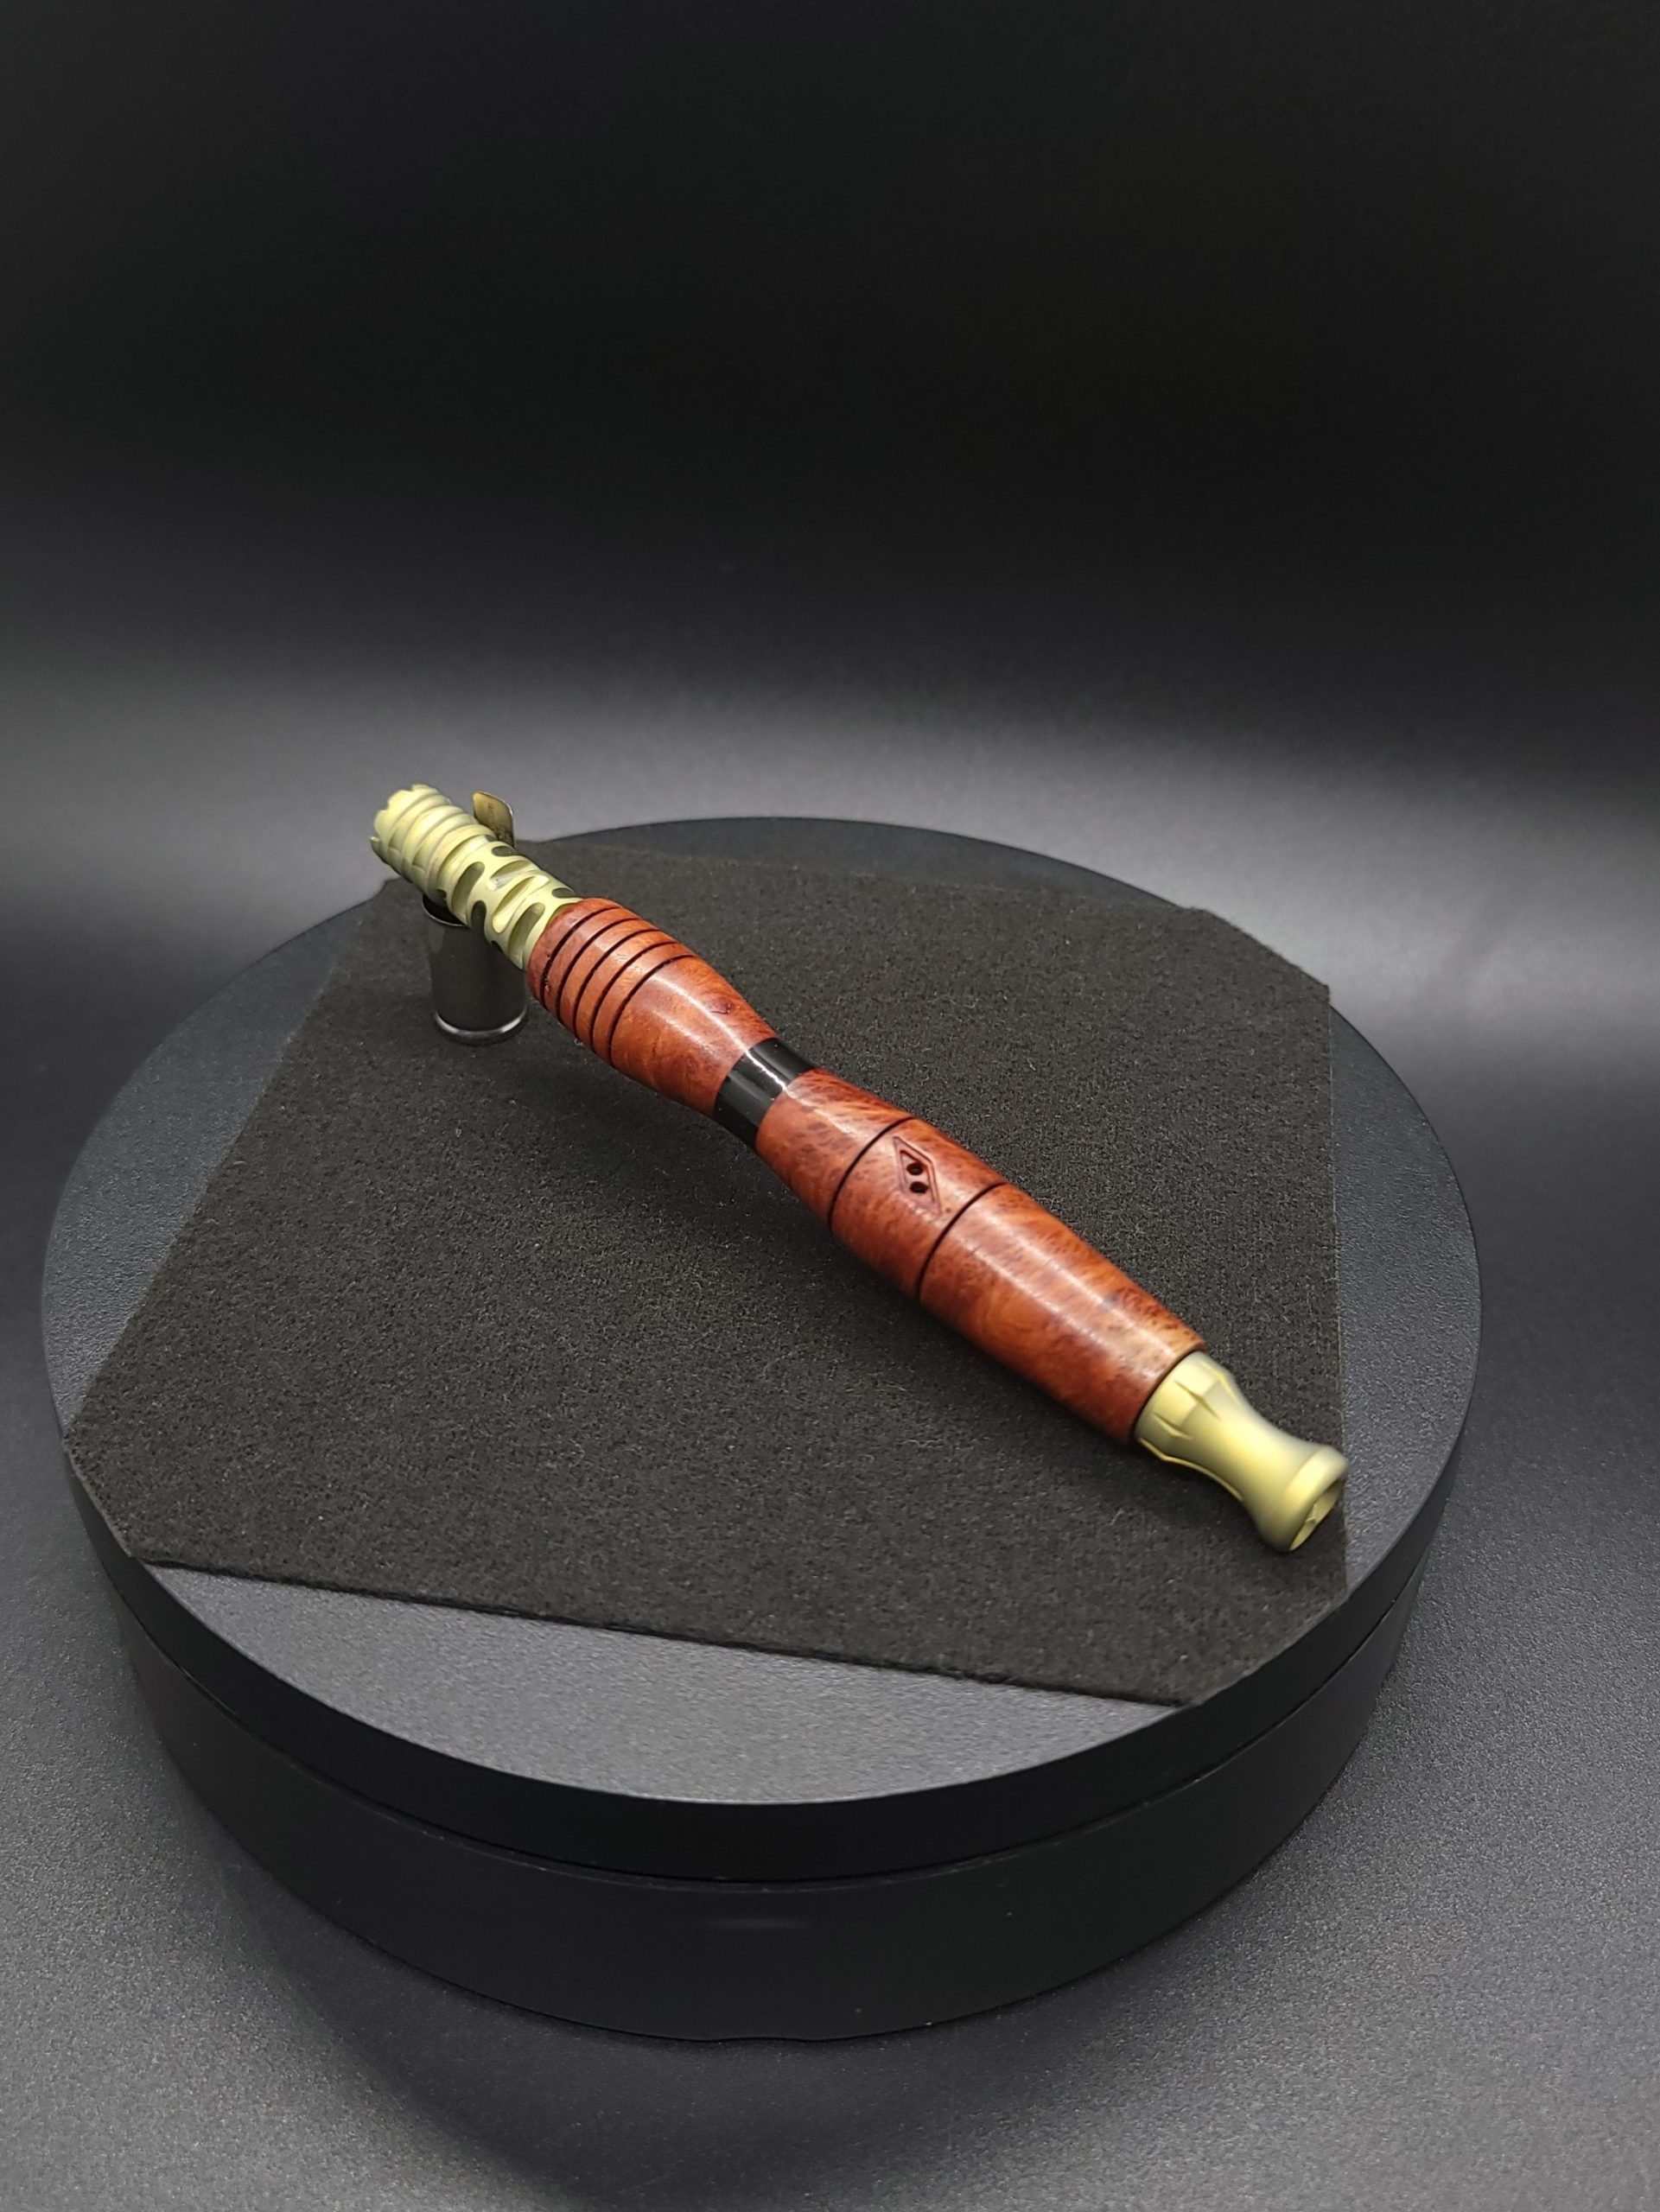 This image portrays Red Mallee Burl Hybrid XL-Hourglass-Dynavap Stem-NEW! by Dovetail Woodwork.